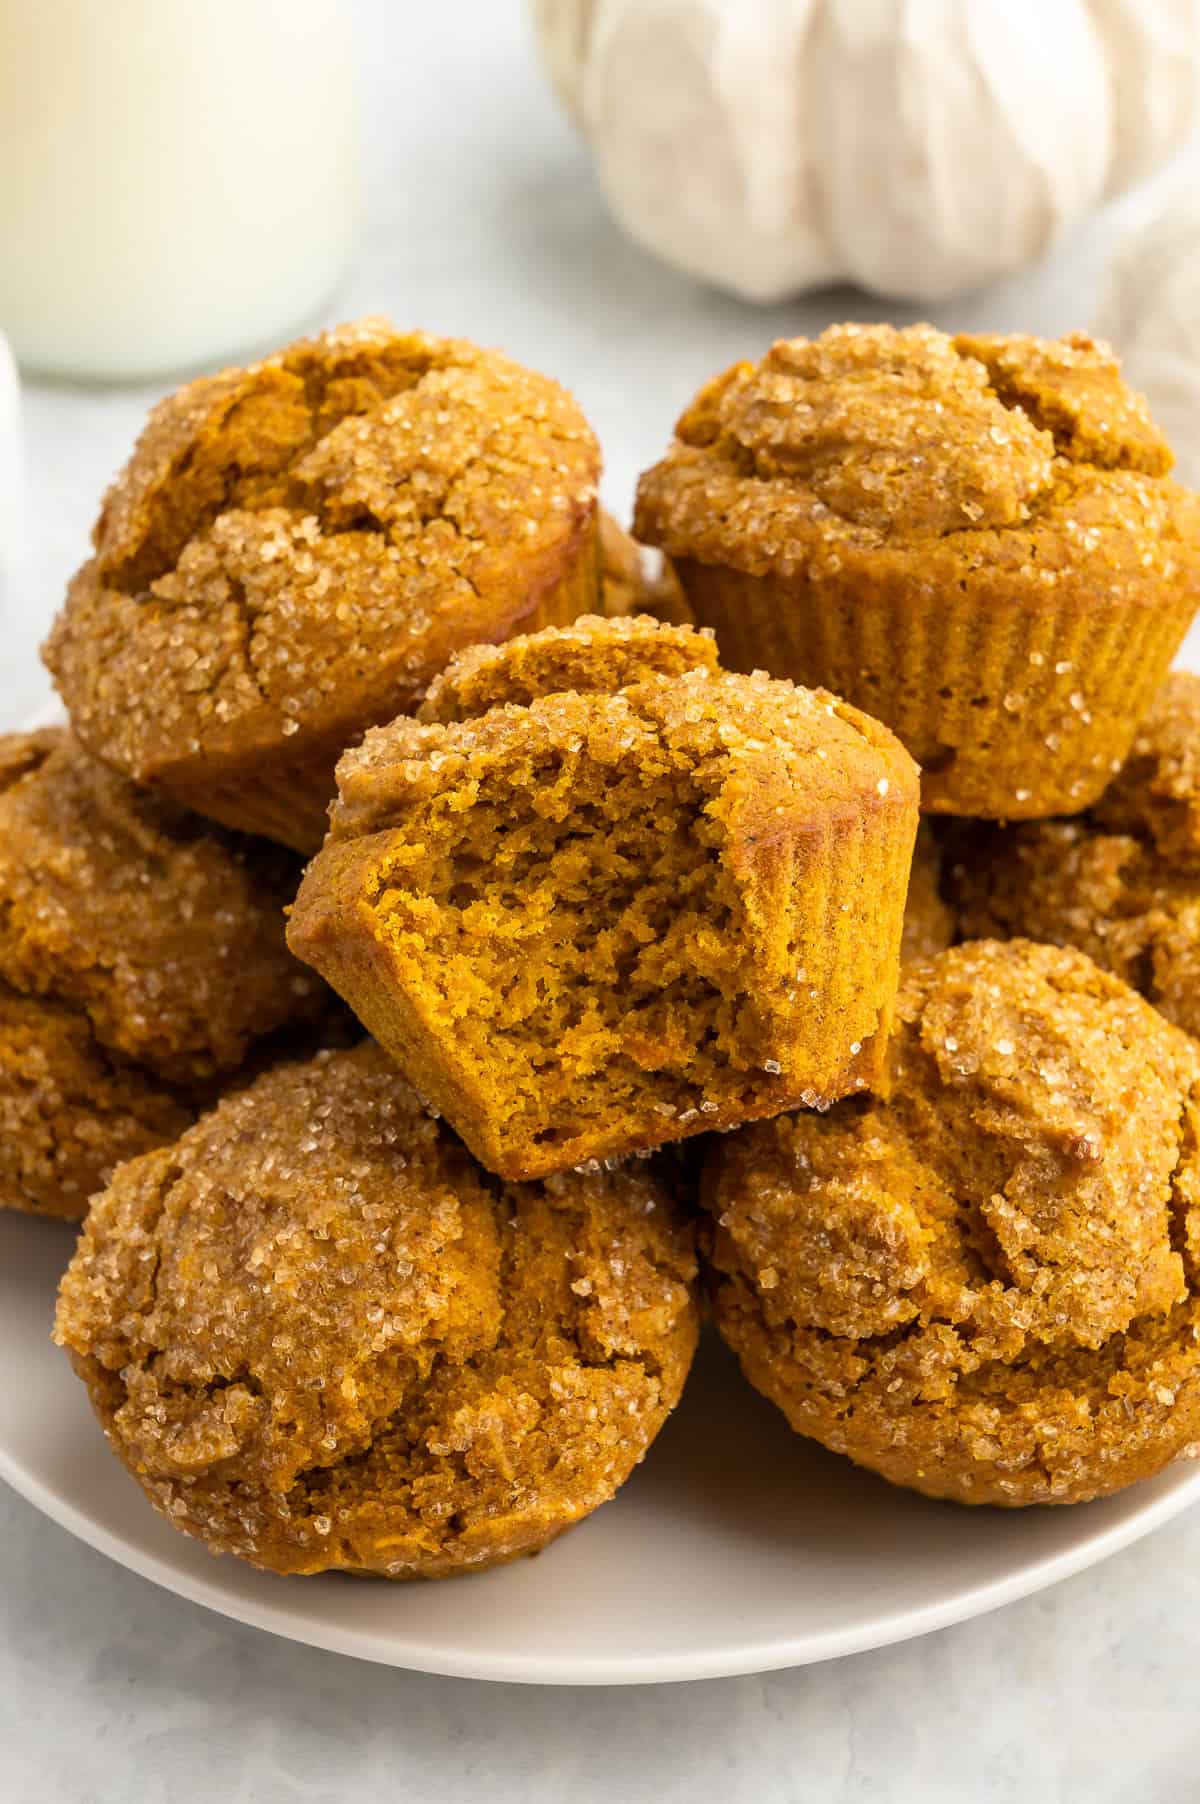 A plate of gluten-free pumpkin muffins with a bite taken out of one.